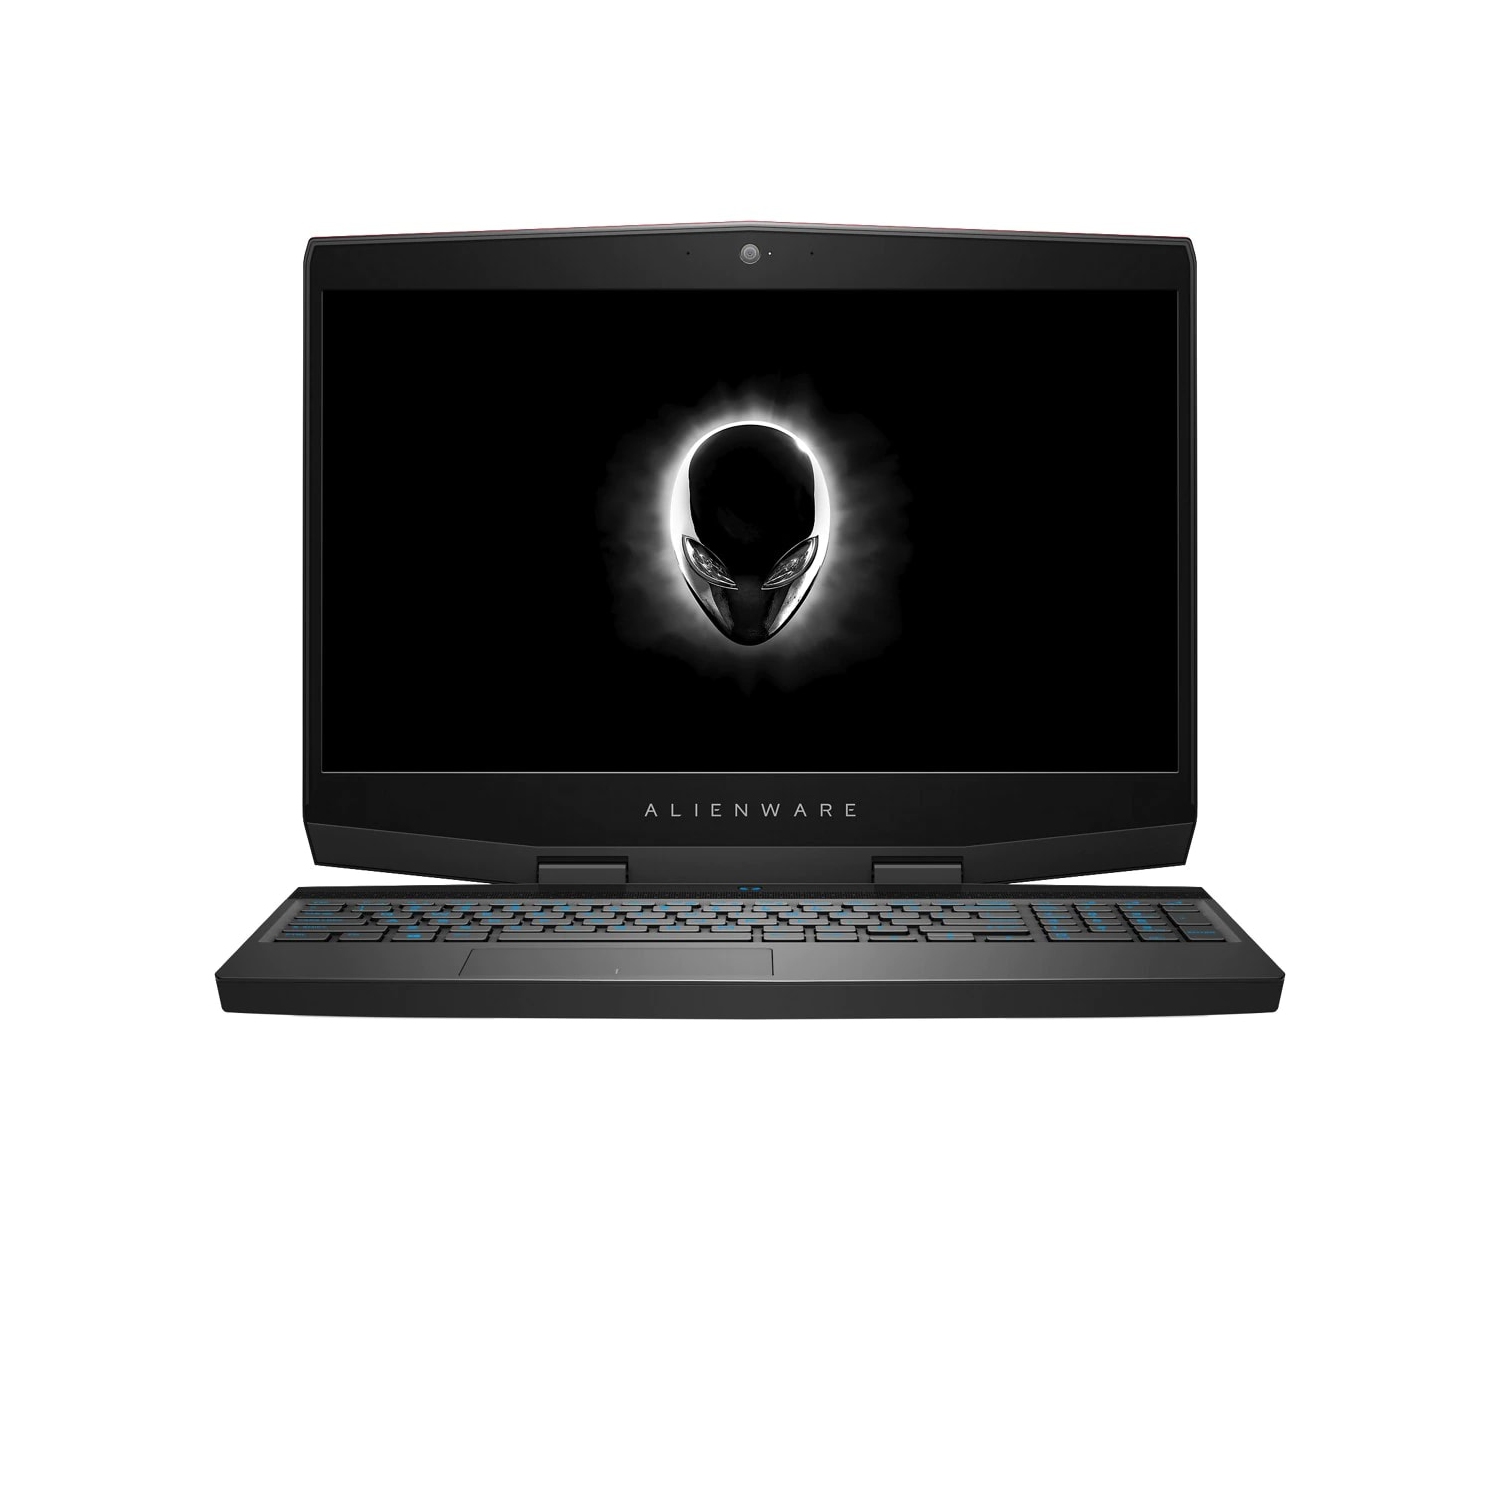 Refurbished (Excellent) - Dell Alienware m15 Gaming Laptop (2018) | 15.6" FHD | Core i7 - 512GB SSD - 16GB RAM - 1660 Ti | 6 Cores @ 4.5 GHz Certified Refurbished